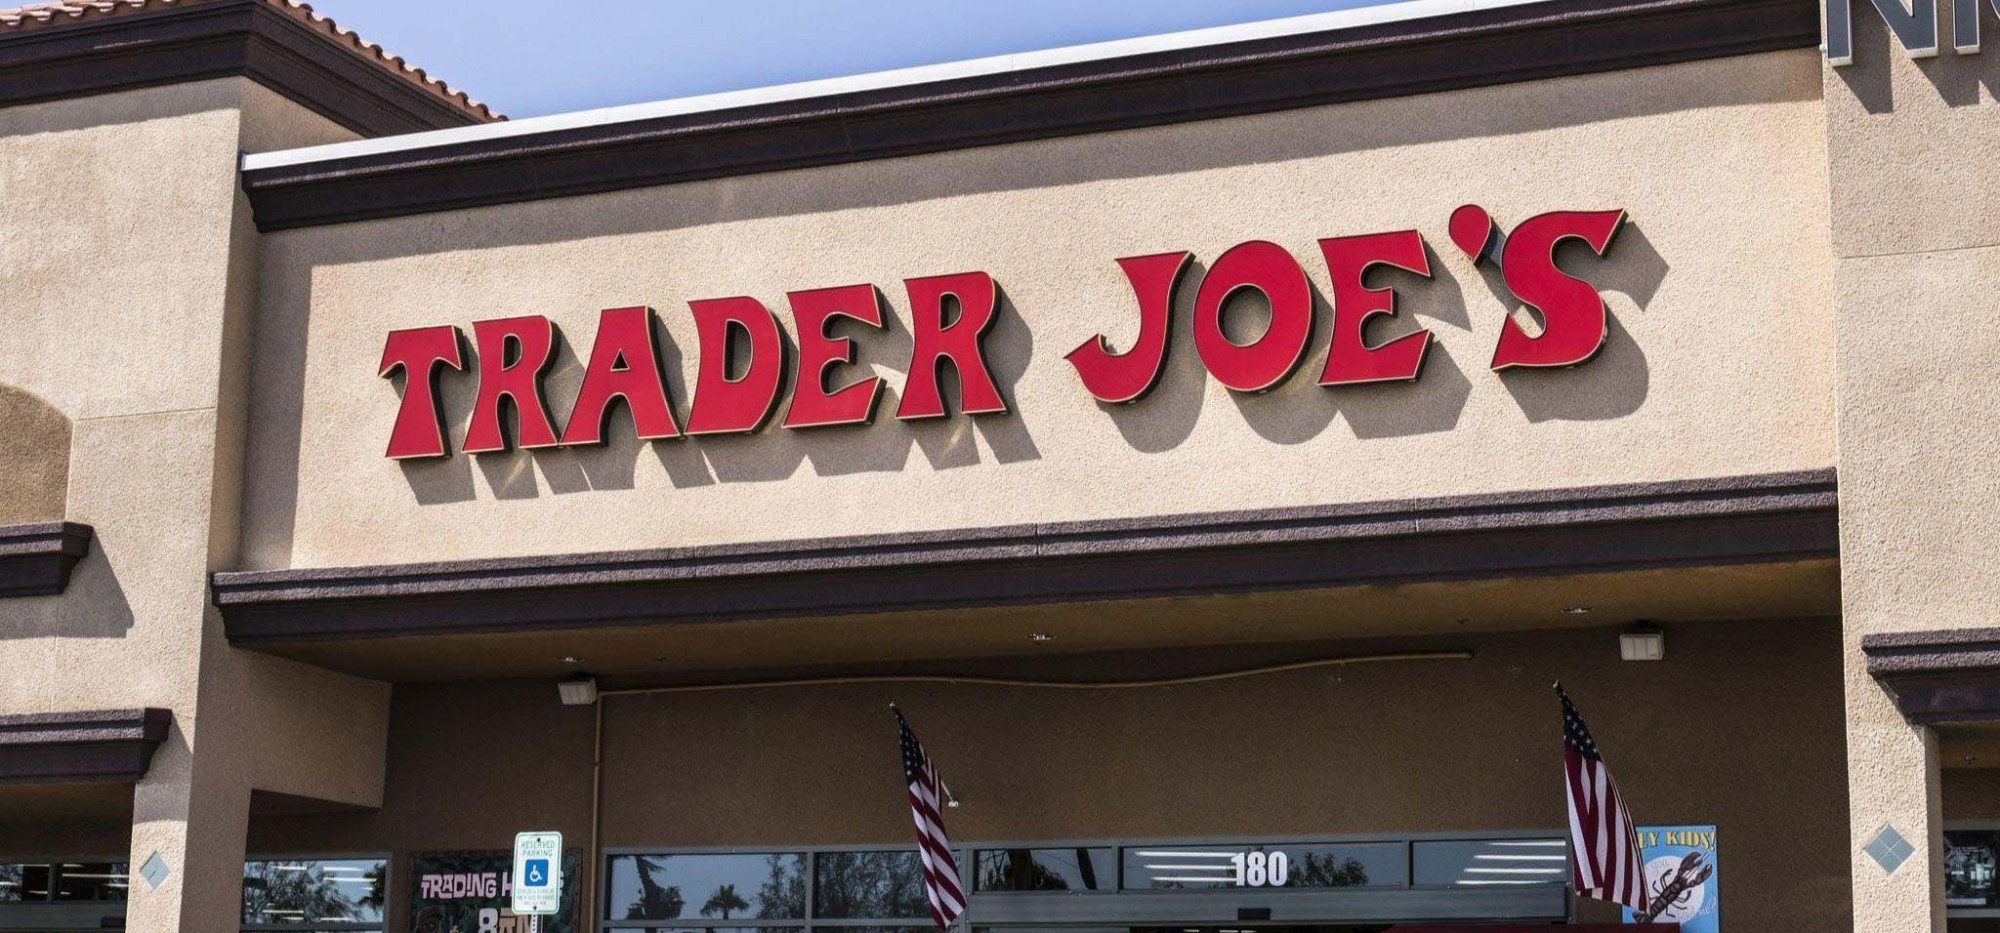 Monrovia-based Trader Joe's is expanding, adding eight stores to its Southern California footprint in the near future. The chain is also adding stores 16 nationwide. (Jonathan Weiss, Chicago Tribune)